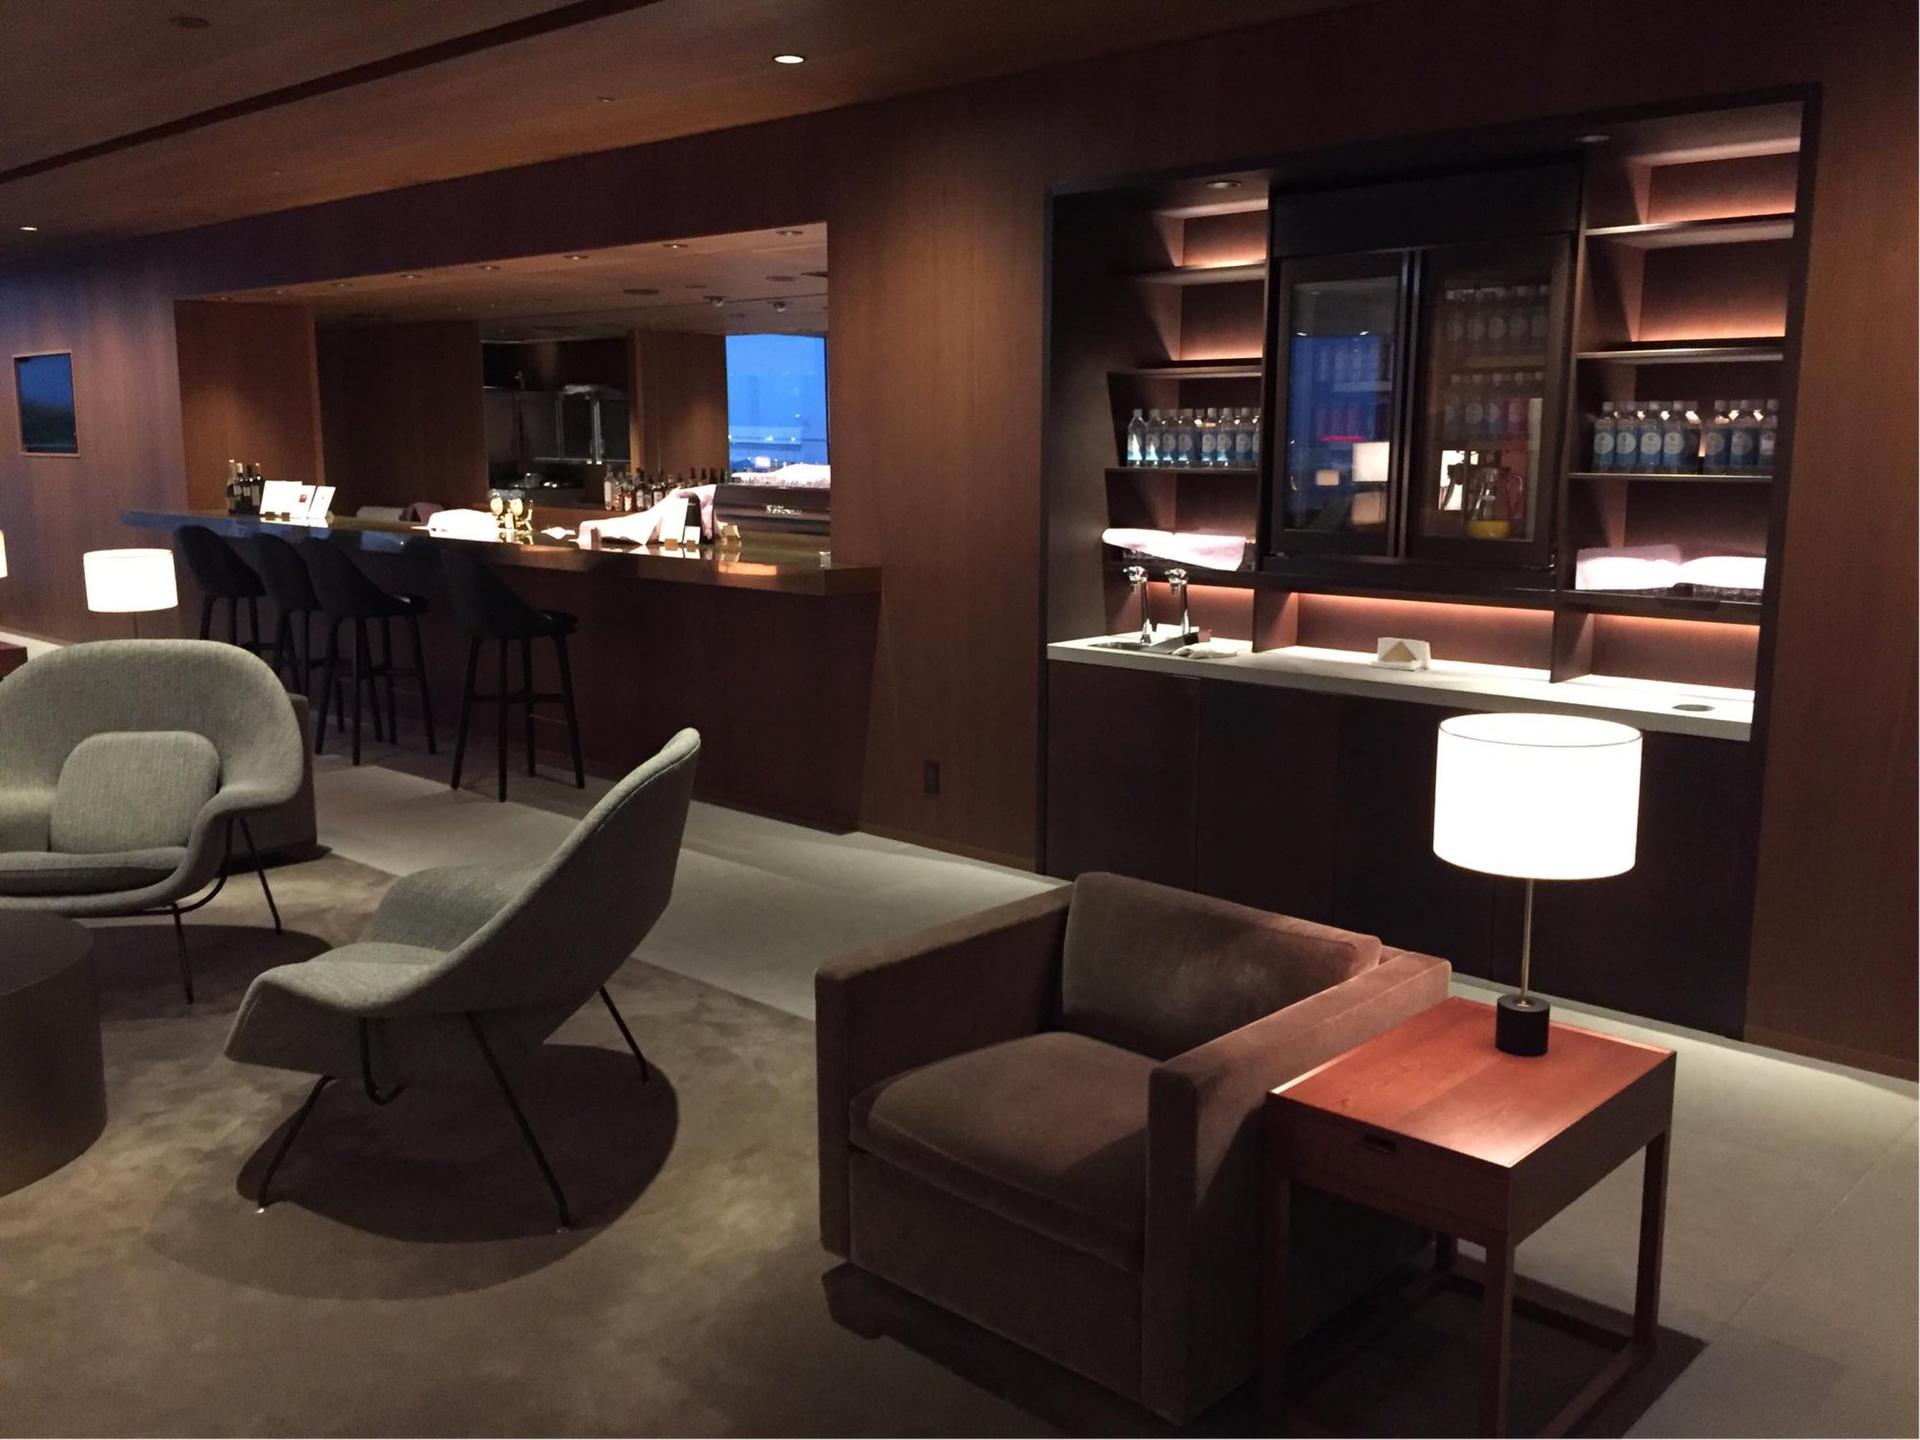 Cathay Pacific Lounge image 5 of 49